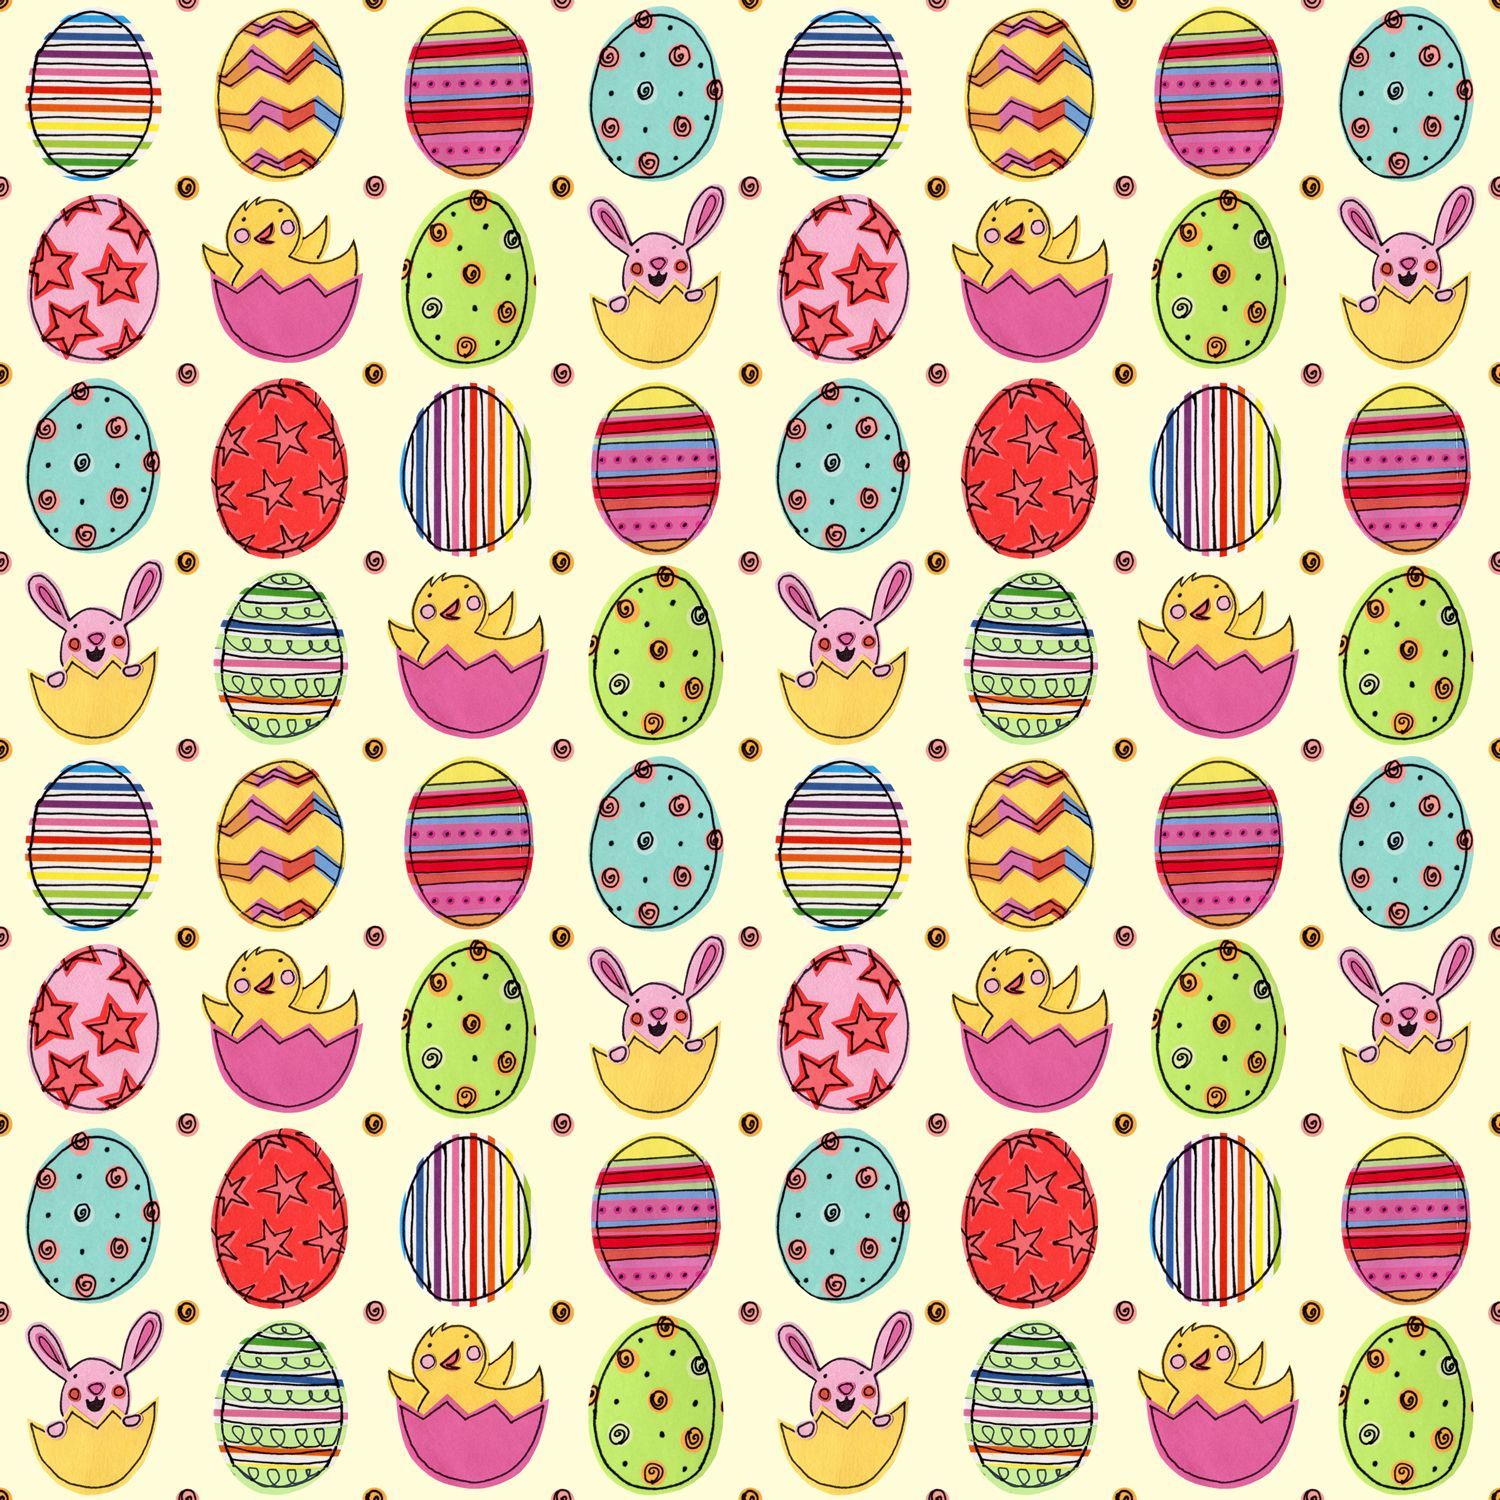 Bird Meets Worm: Happy Easter Eggs Repeat Pattern. Easter wallpaper, Easter chicks, Easter art